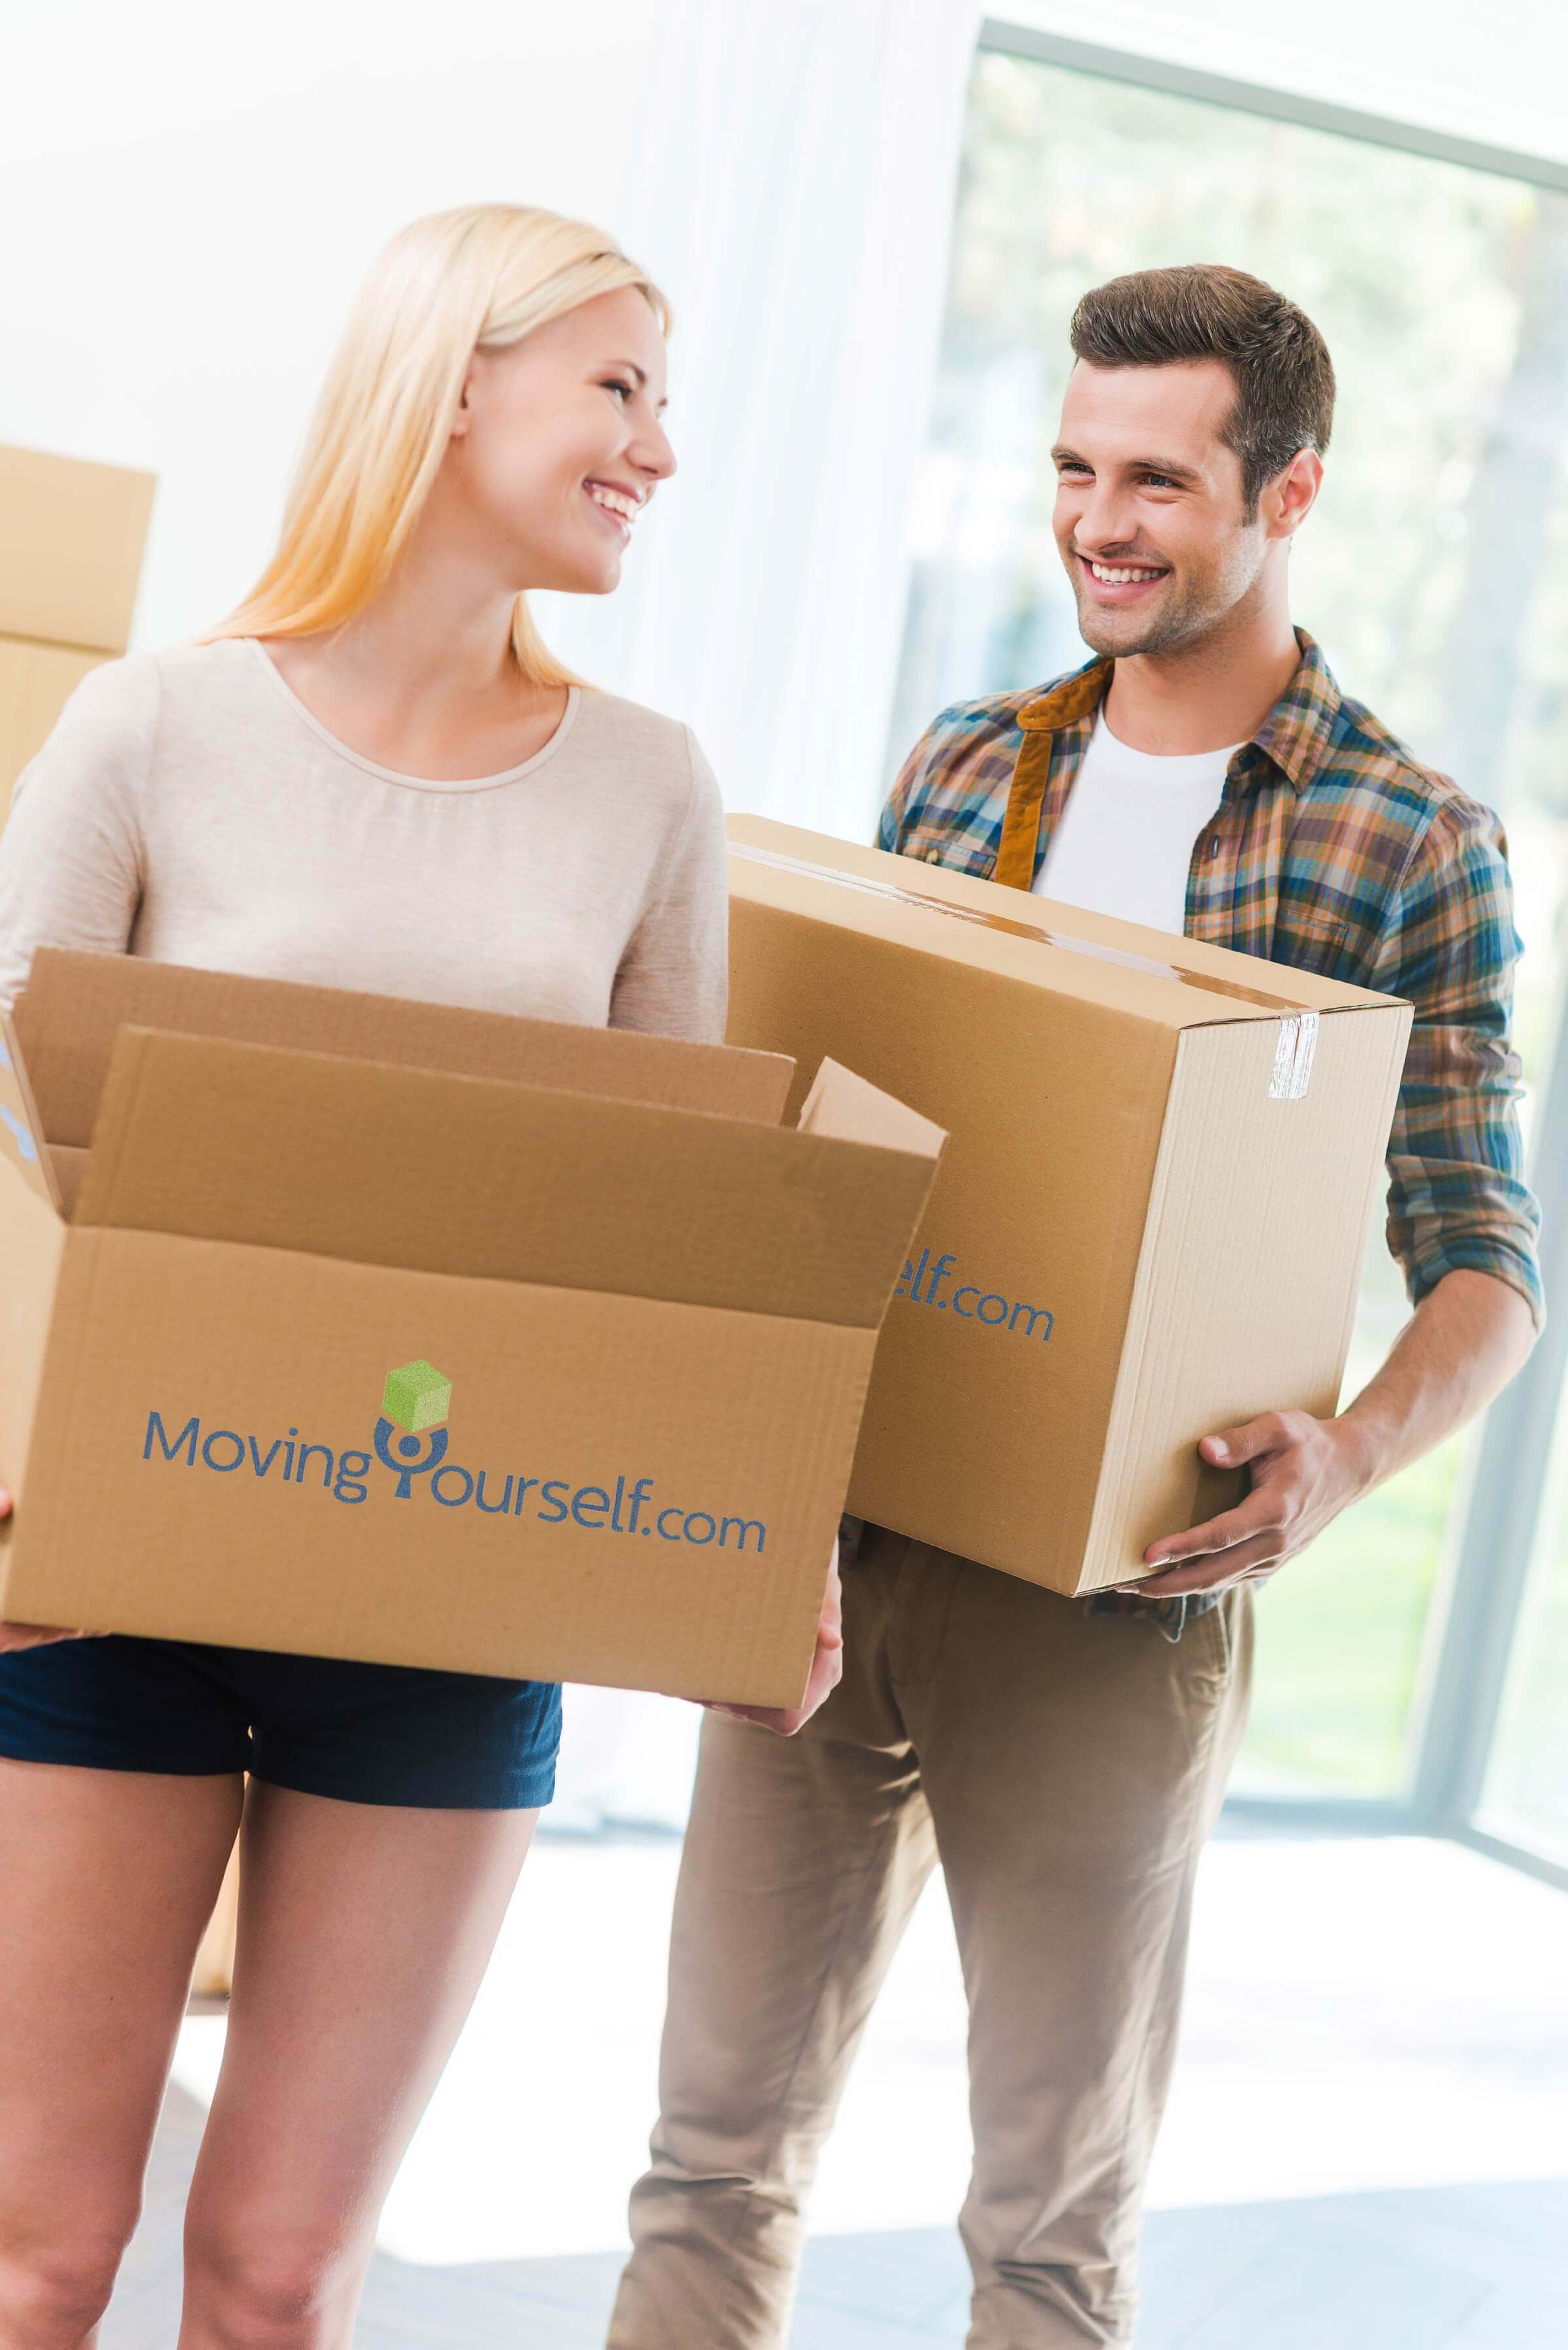 MovingYourself | The MovingYourself Promise